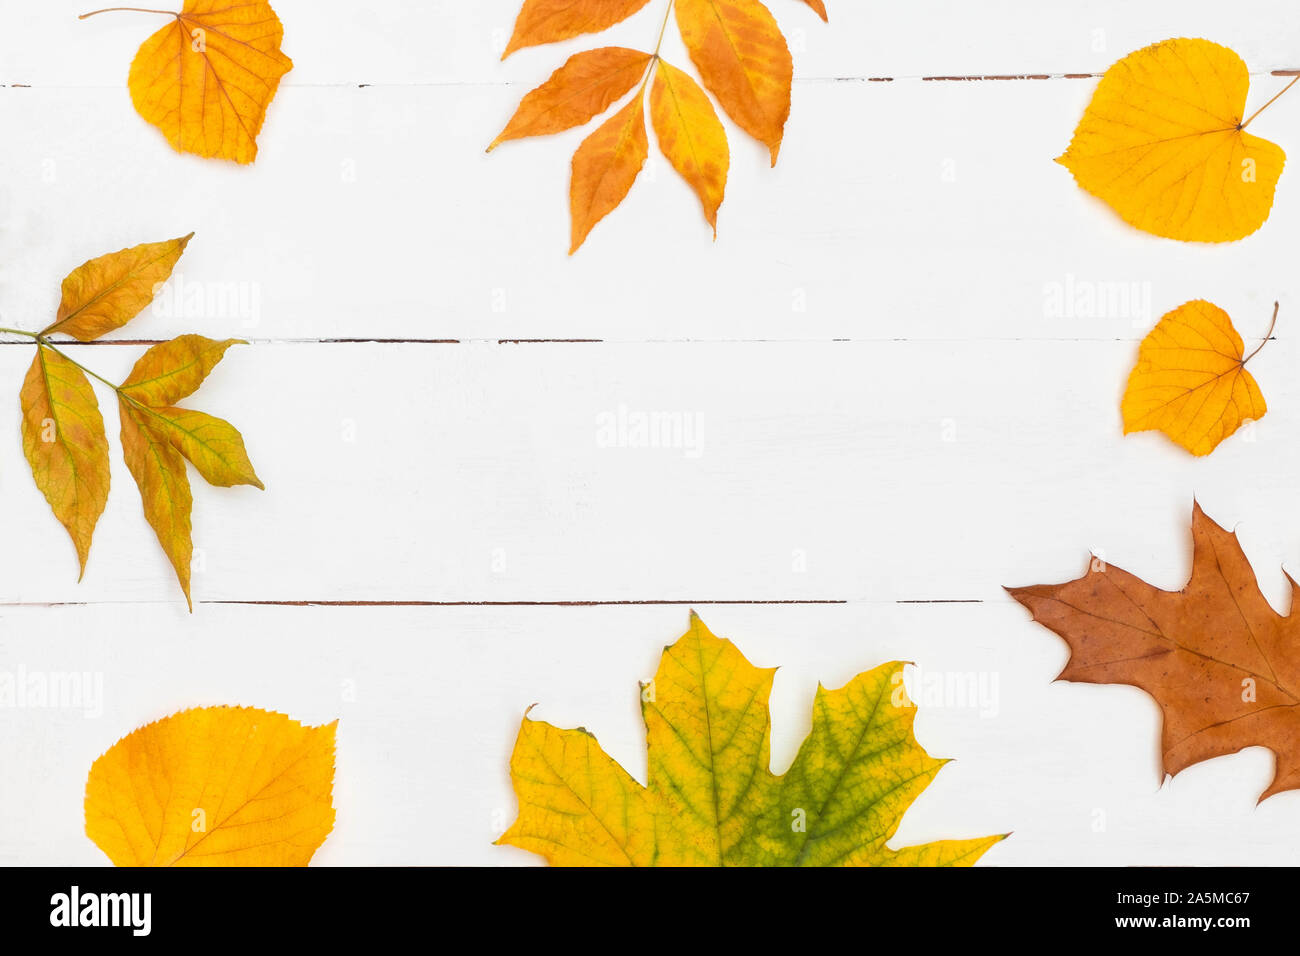 Autunm background. Frame made of yellow and orange leaves on white wooden table. Image with copy space, top view Stock Photo